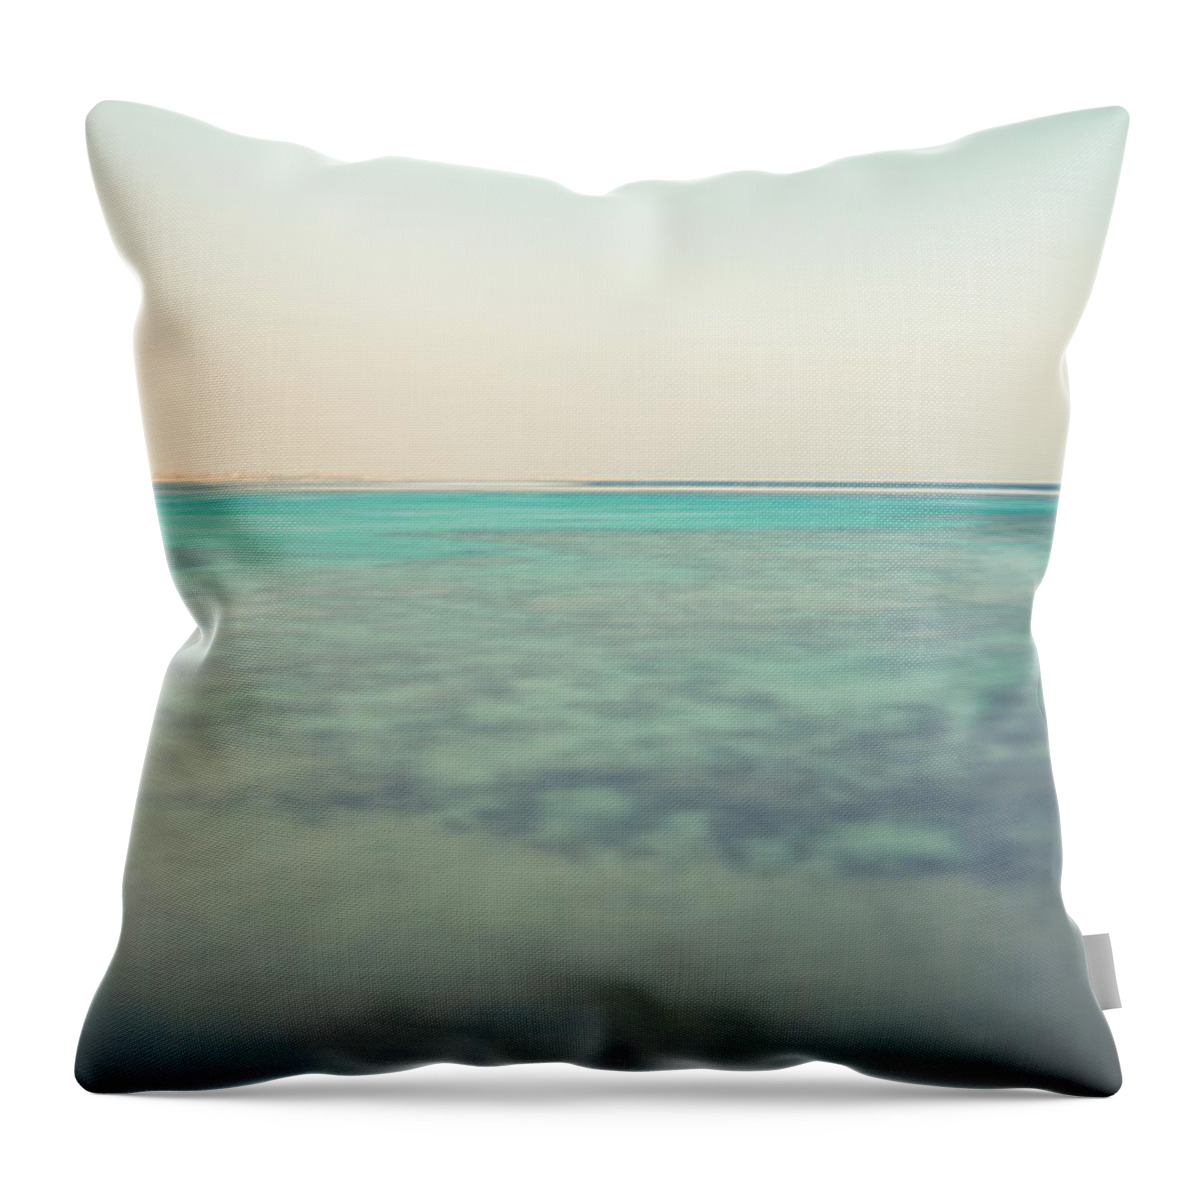 Africa Throw Pillow featuring the photograph Inner Calmness by Hannes Cmarits